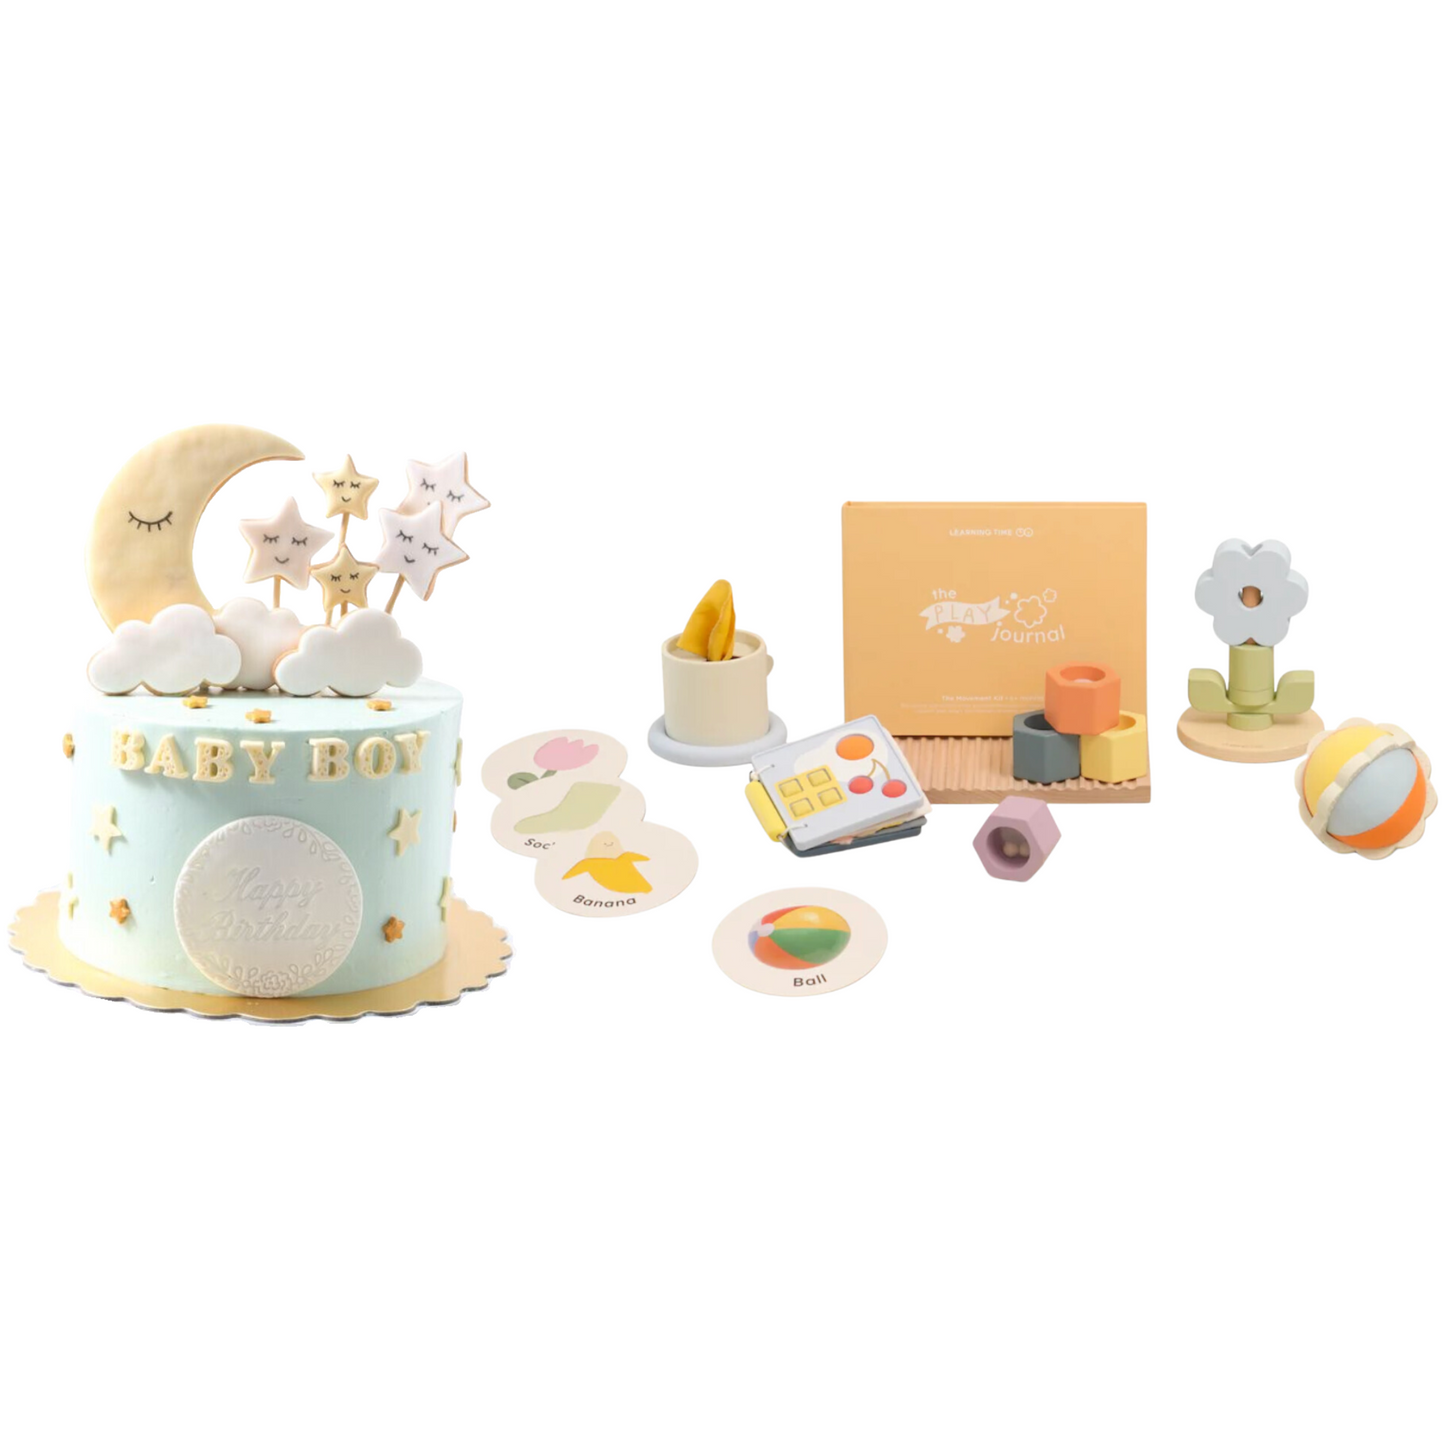 Sweet Dream and Learning Time Gift Bundle